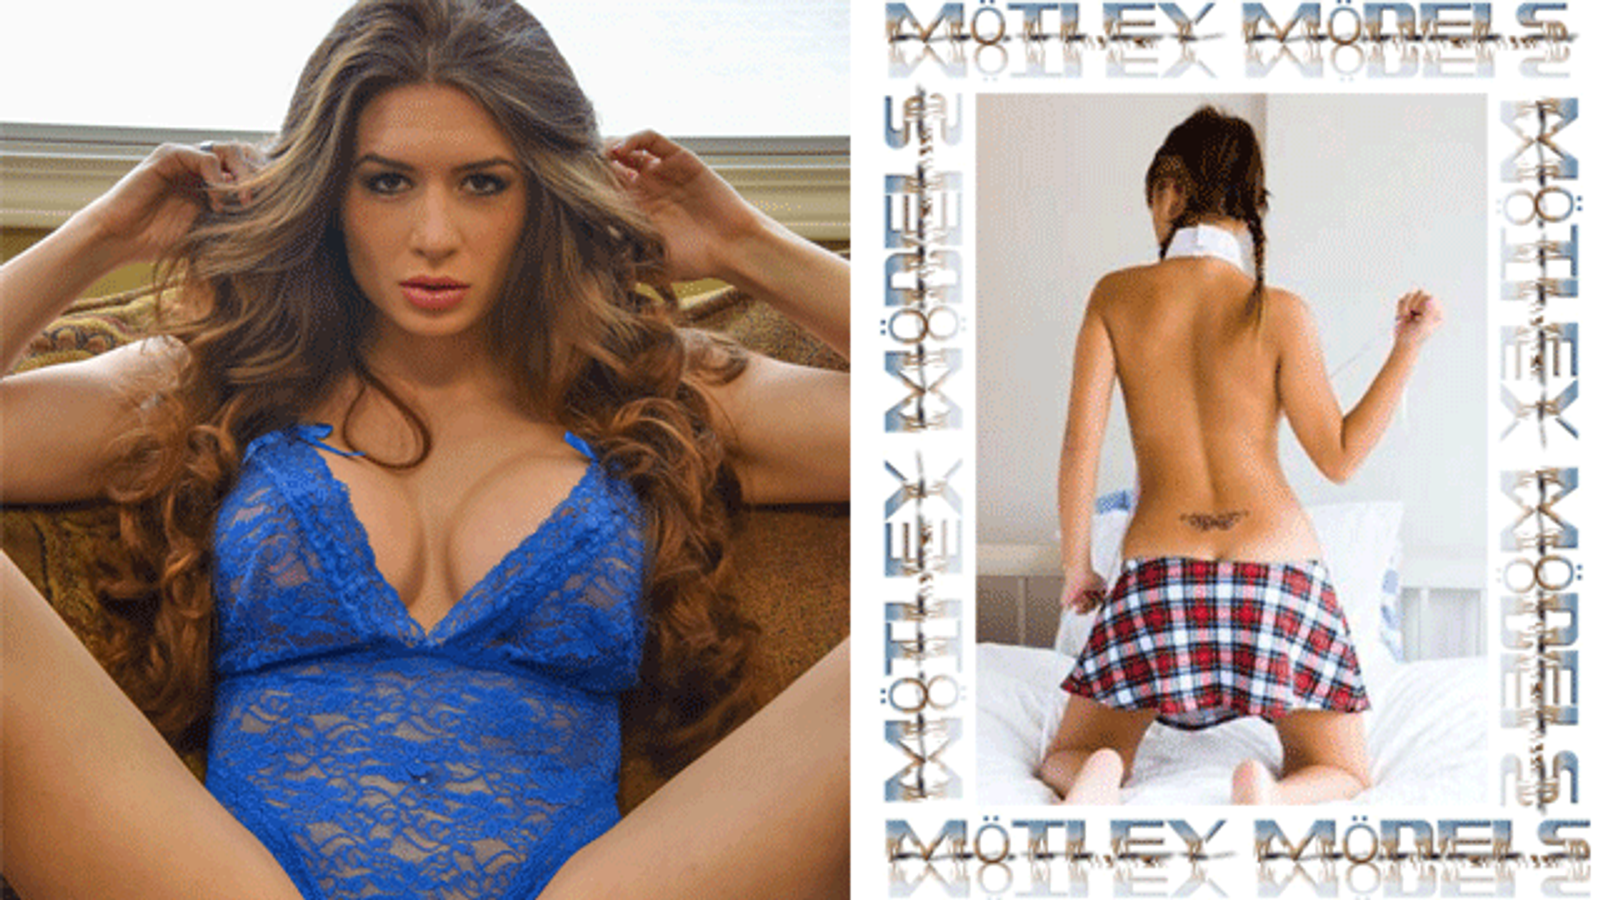 Veronica Vain Signs With Motley Models